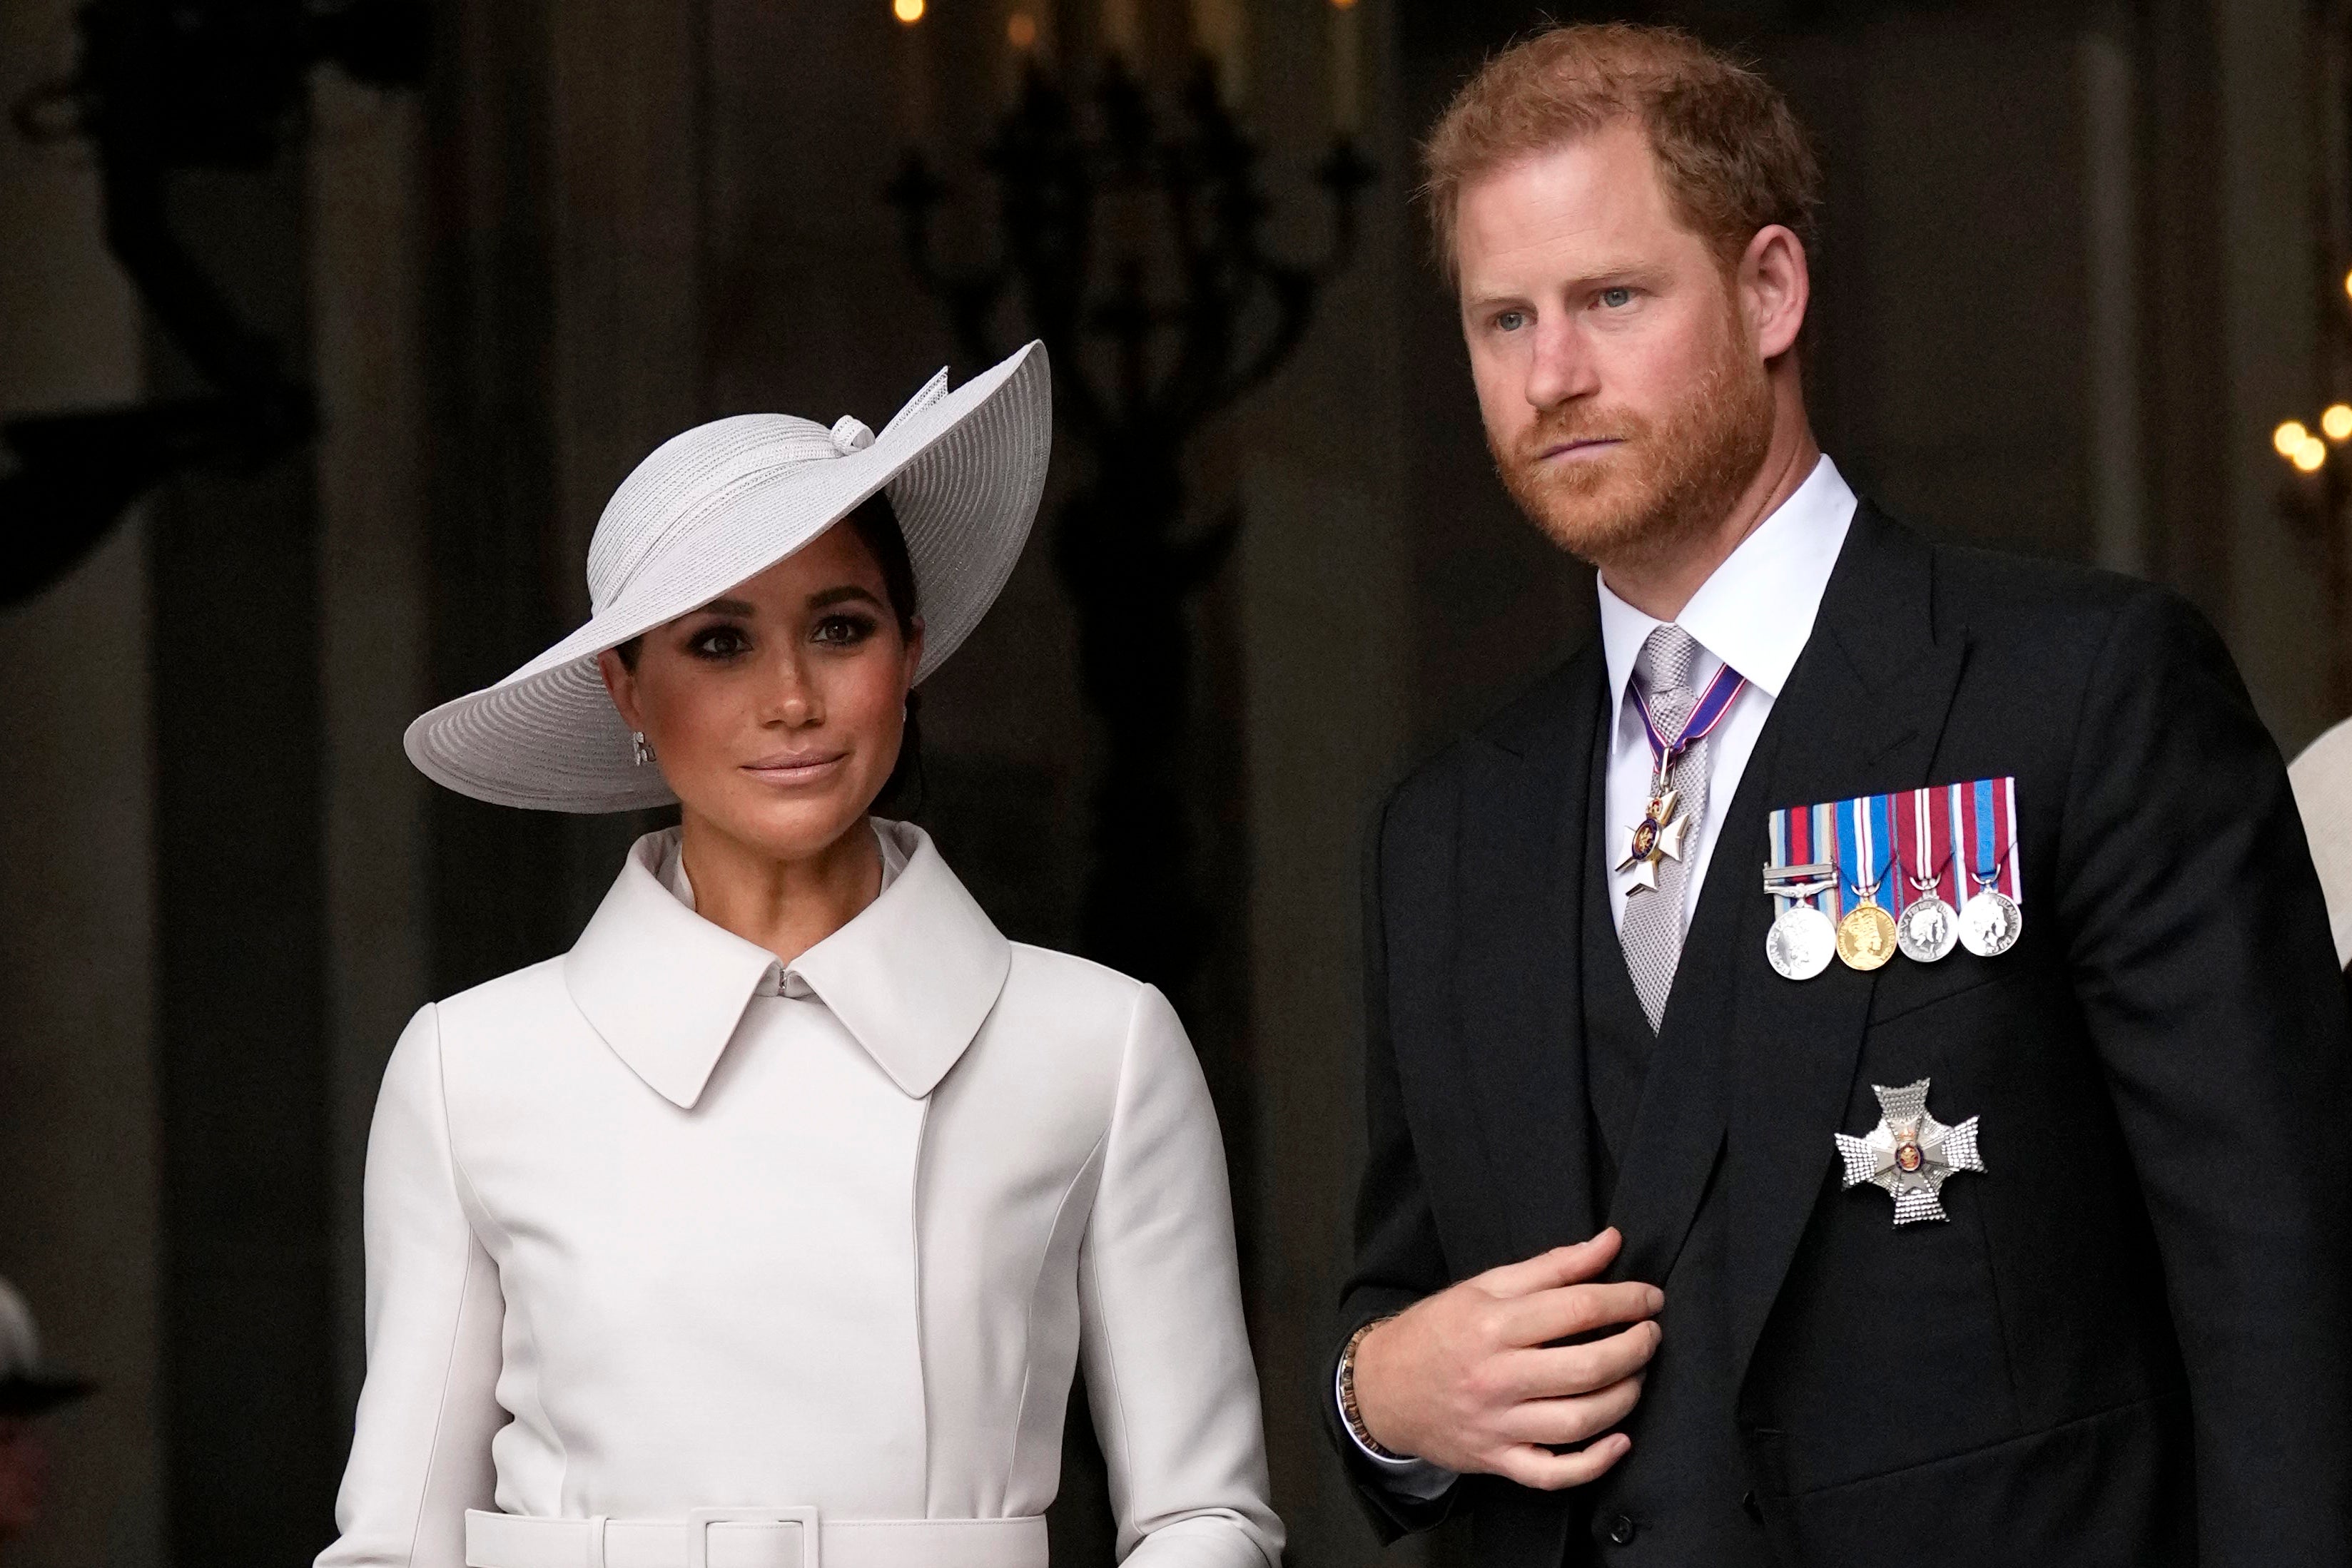 Prince Harry and Meghan Markle stepped down as working royals in 2020, less than a year after the birth of Prince Archie.